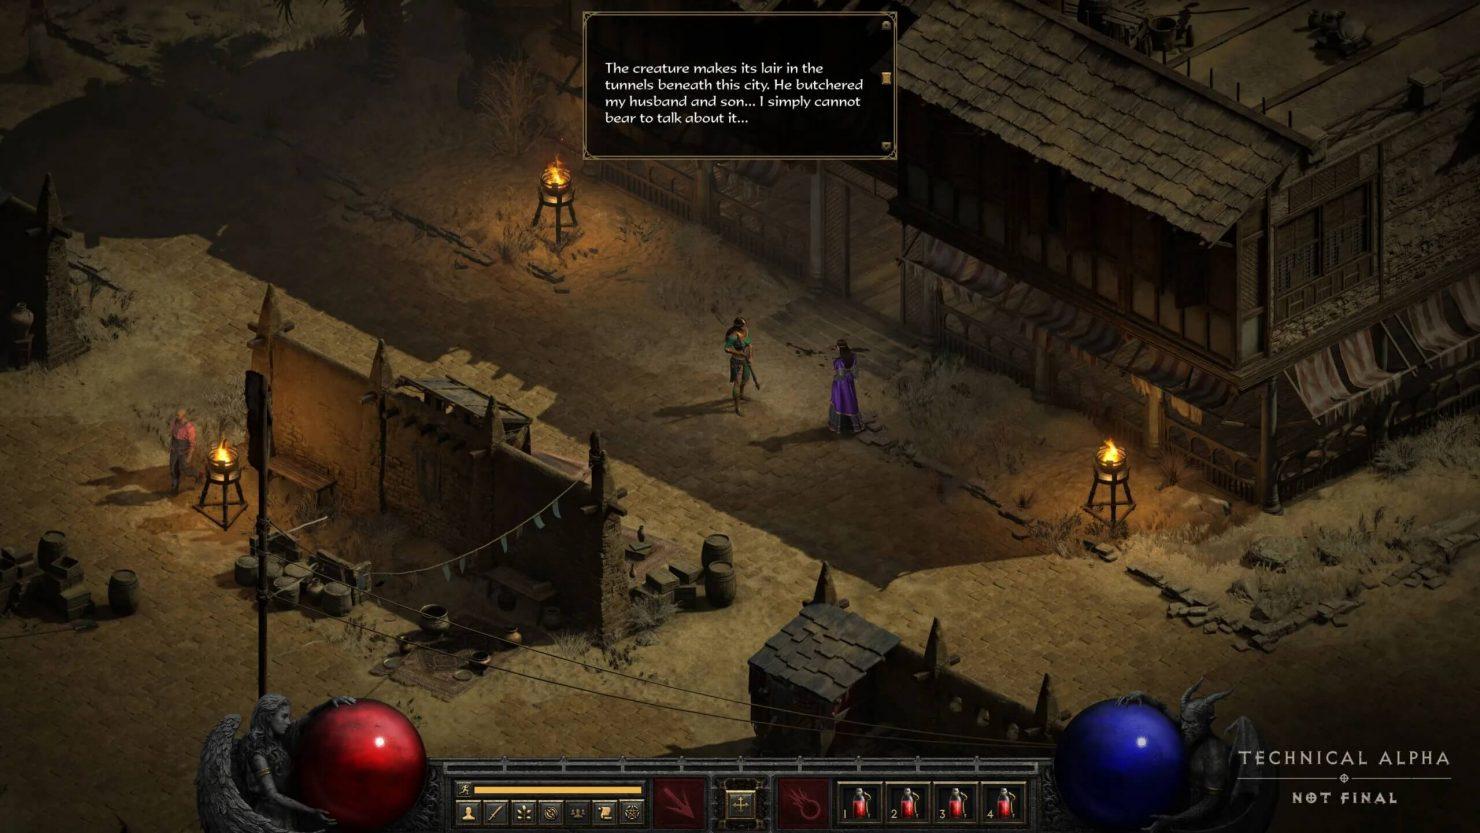 Diablo 2 Resurrected Patch 2.4 includes some positive skill changes